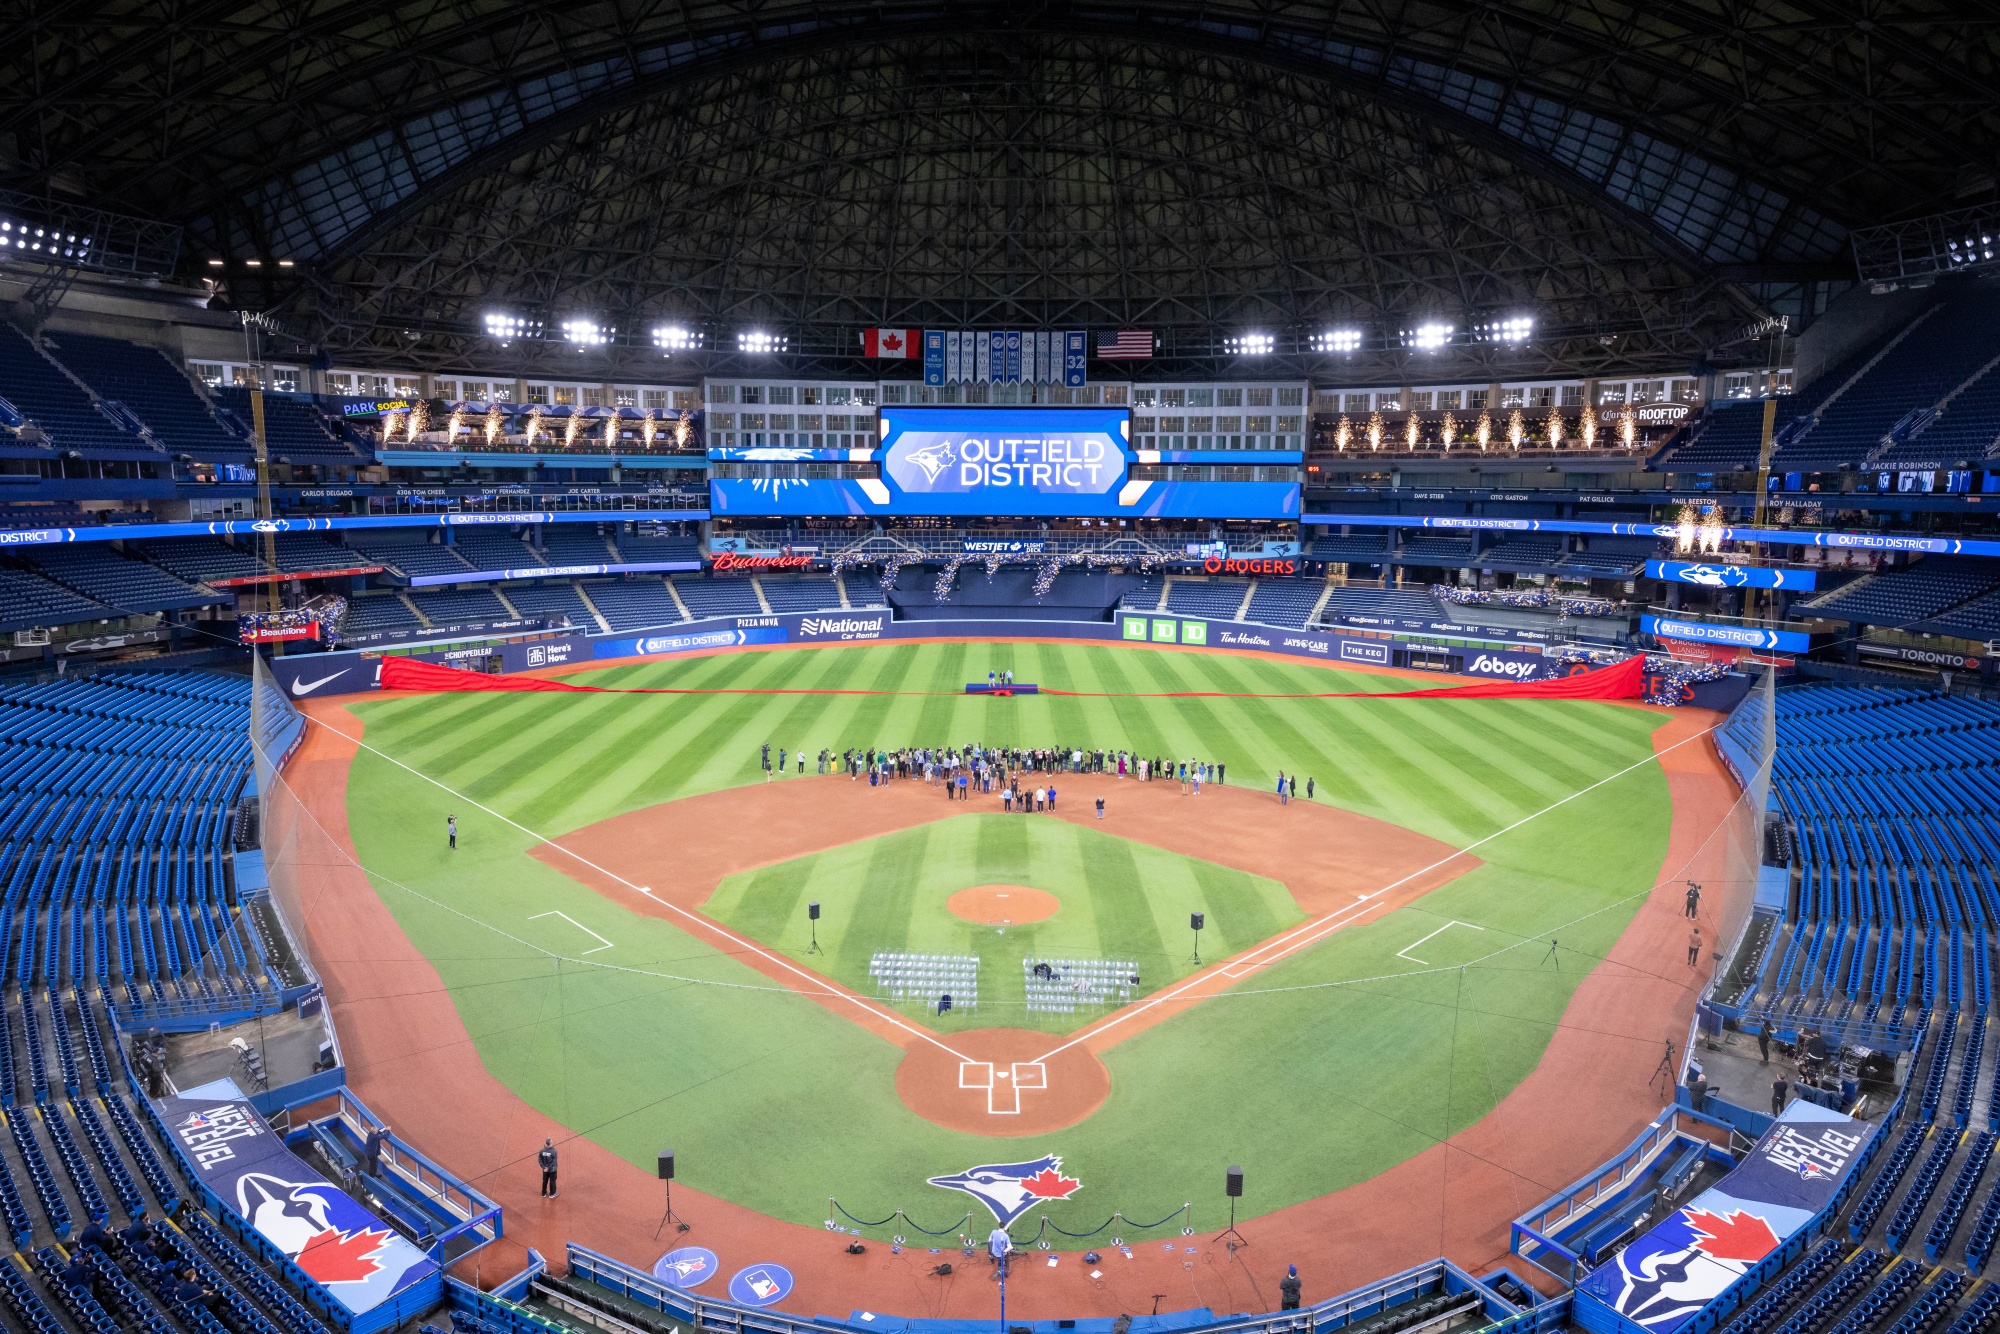 New-look Rogers Centre outfield a potential boon for Blue Jays